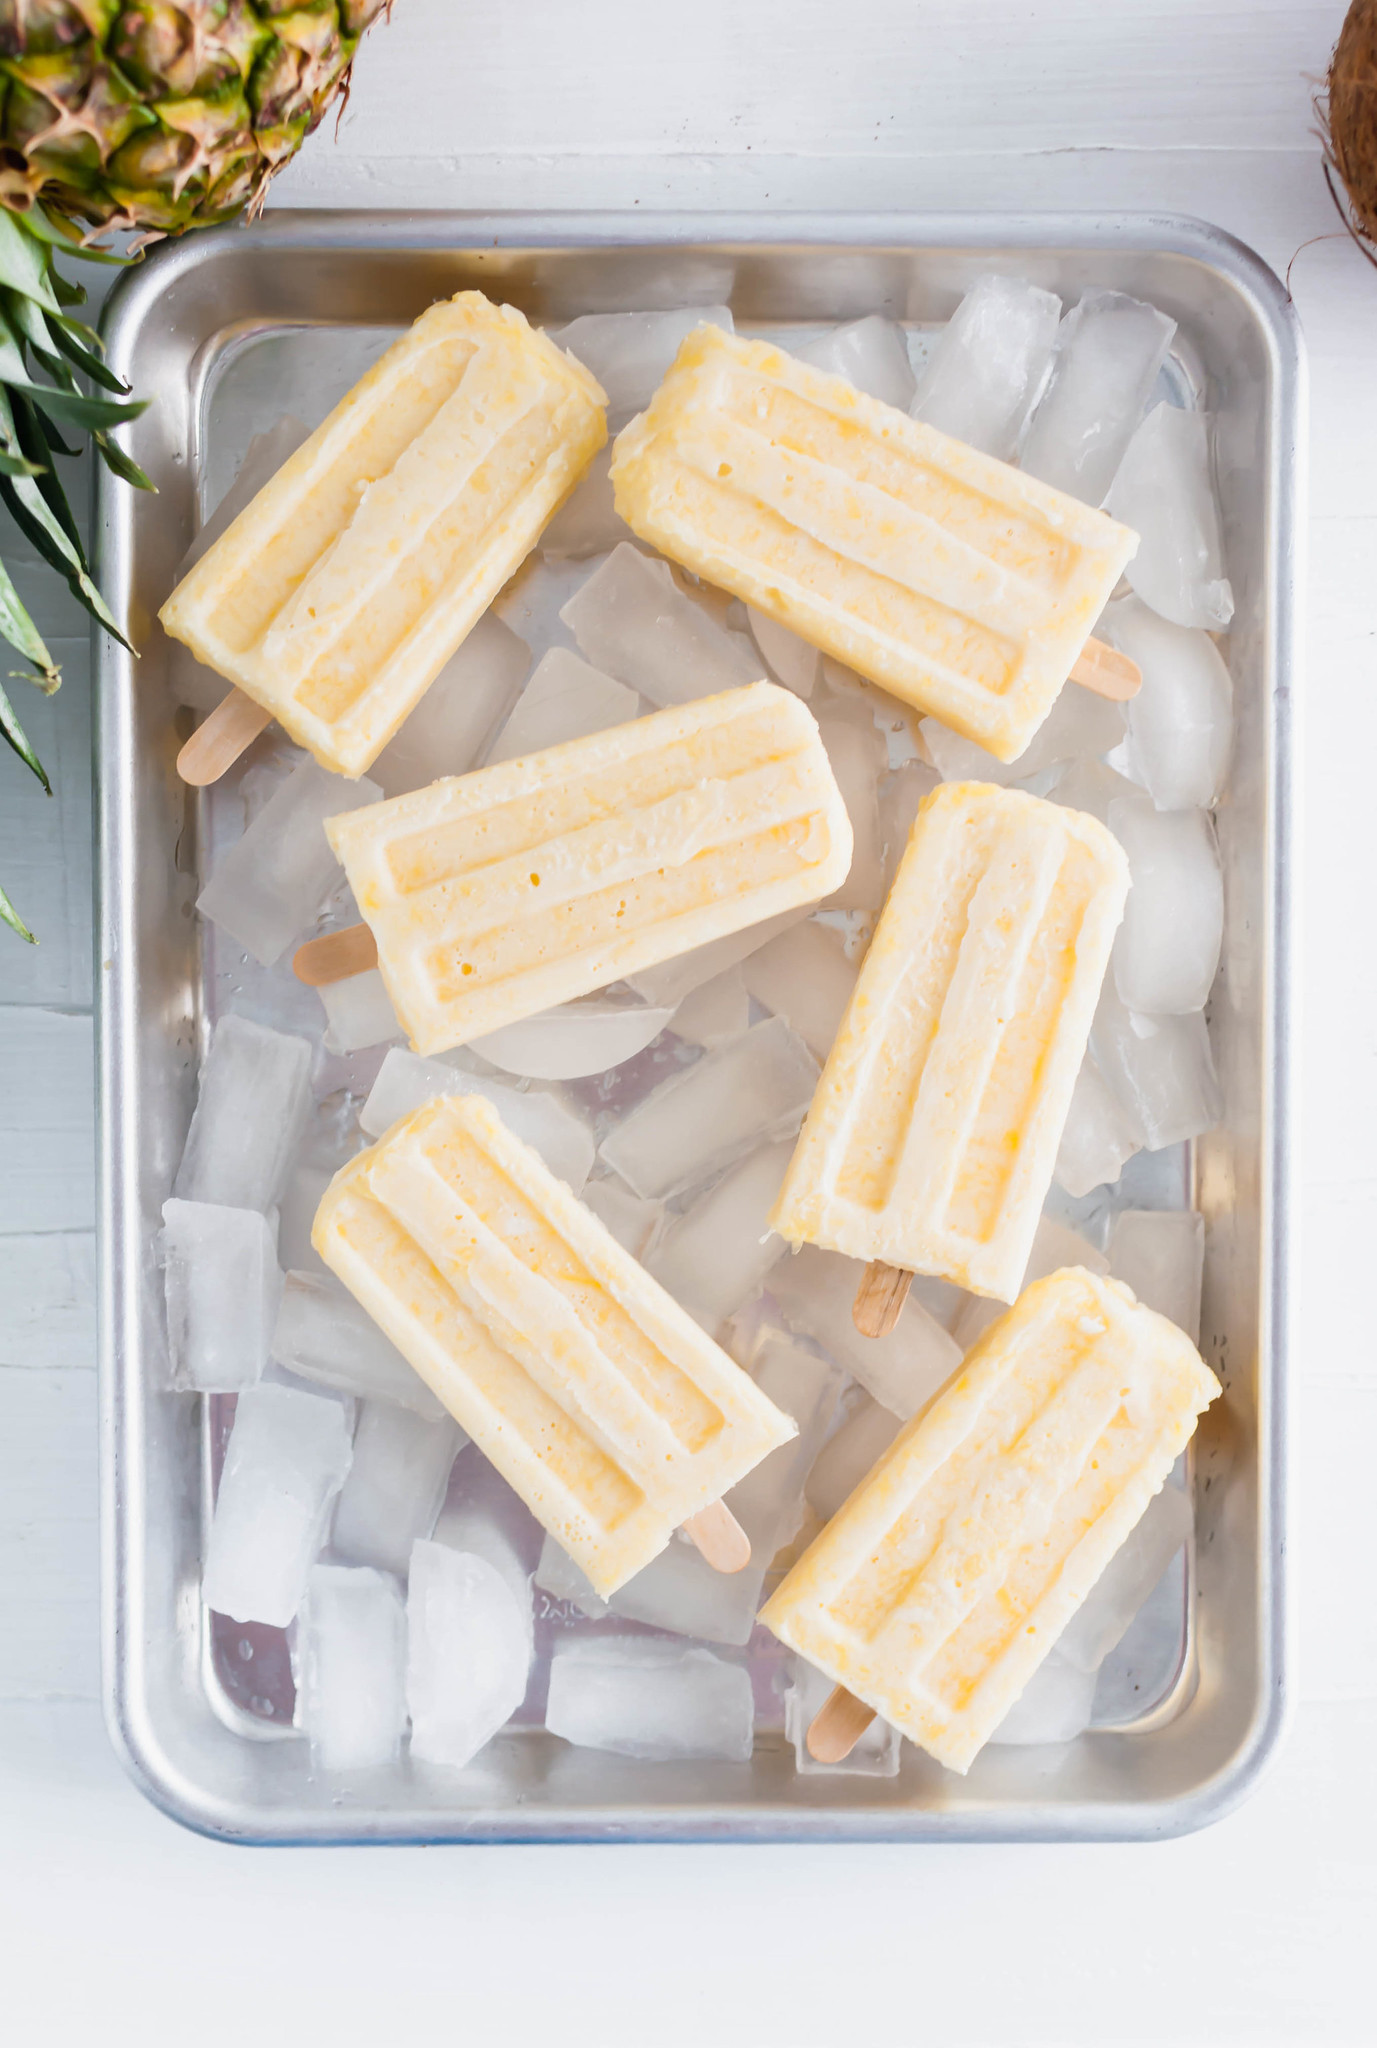 These Pina Colada Popsicles will be the treat of summer. Creamy coconut and sweet pineapple make a simple, delicious dessert that tastes just like the classic drink (without the booze). 